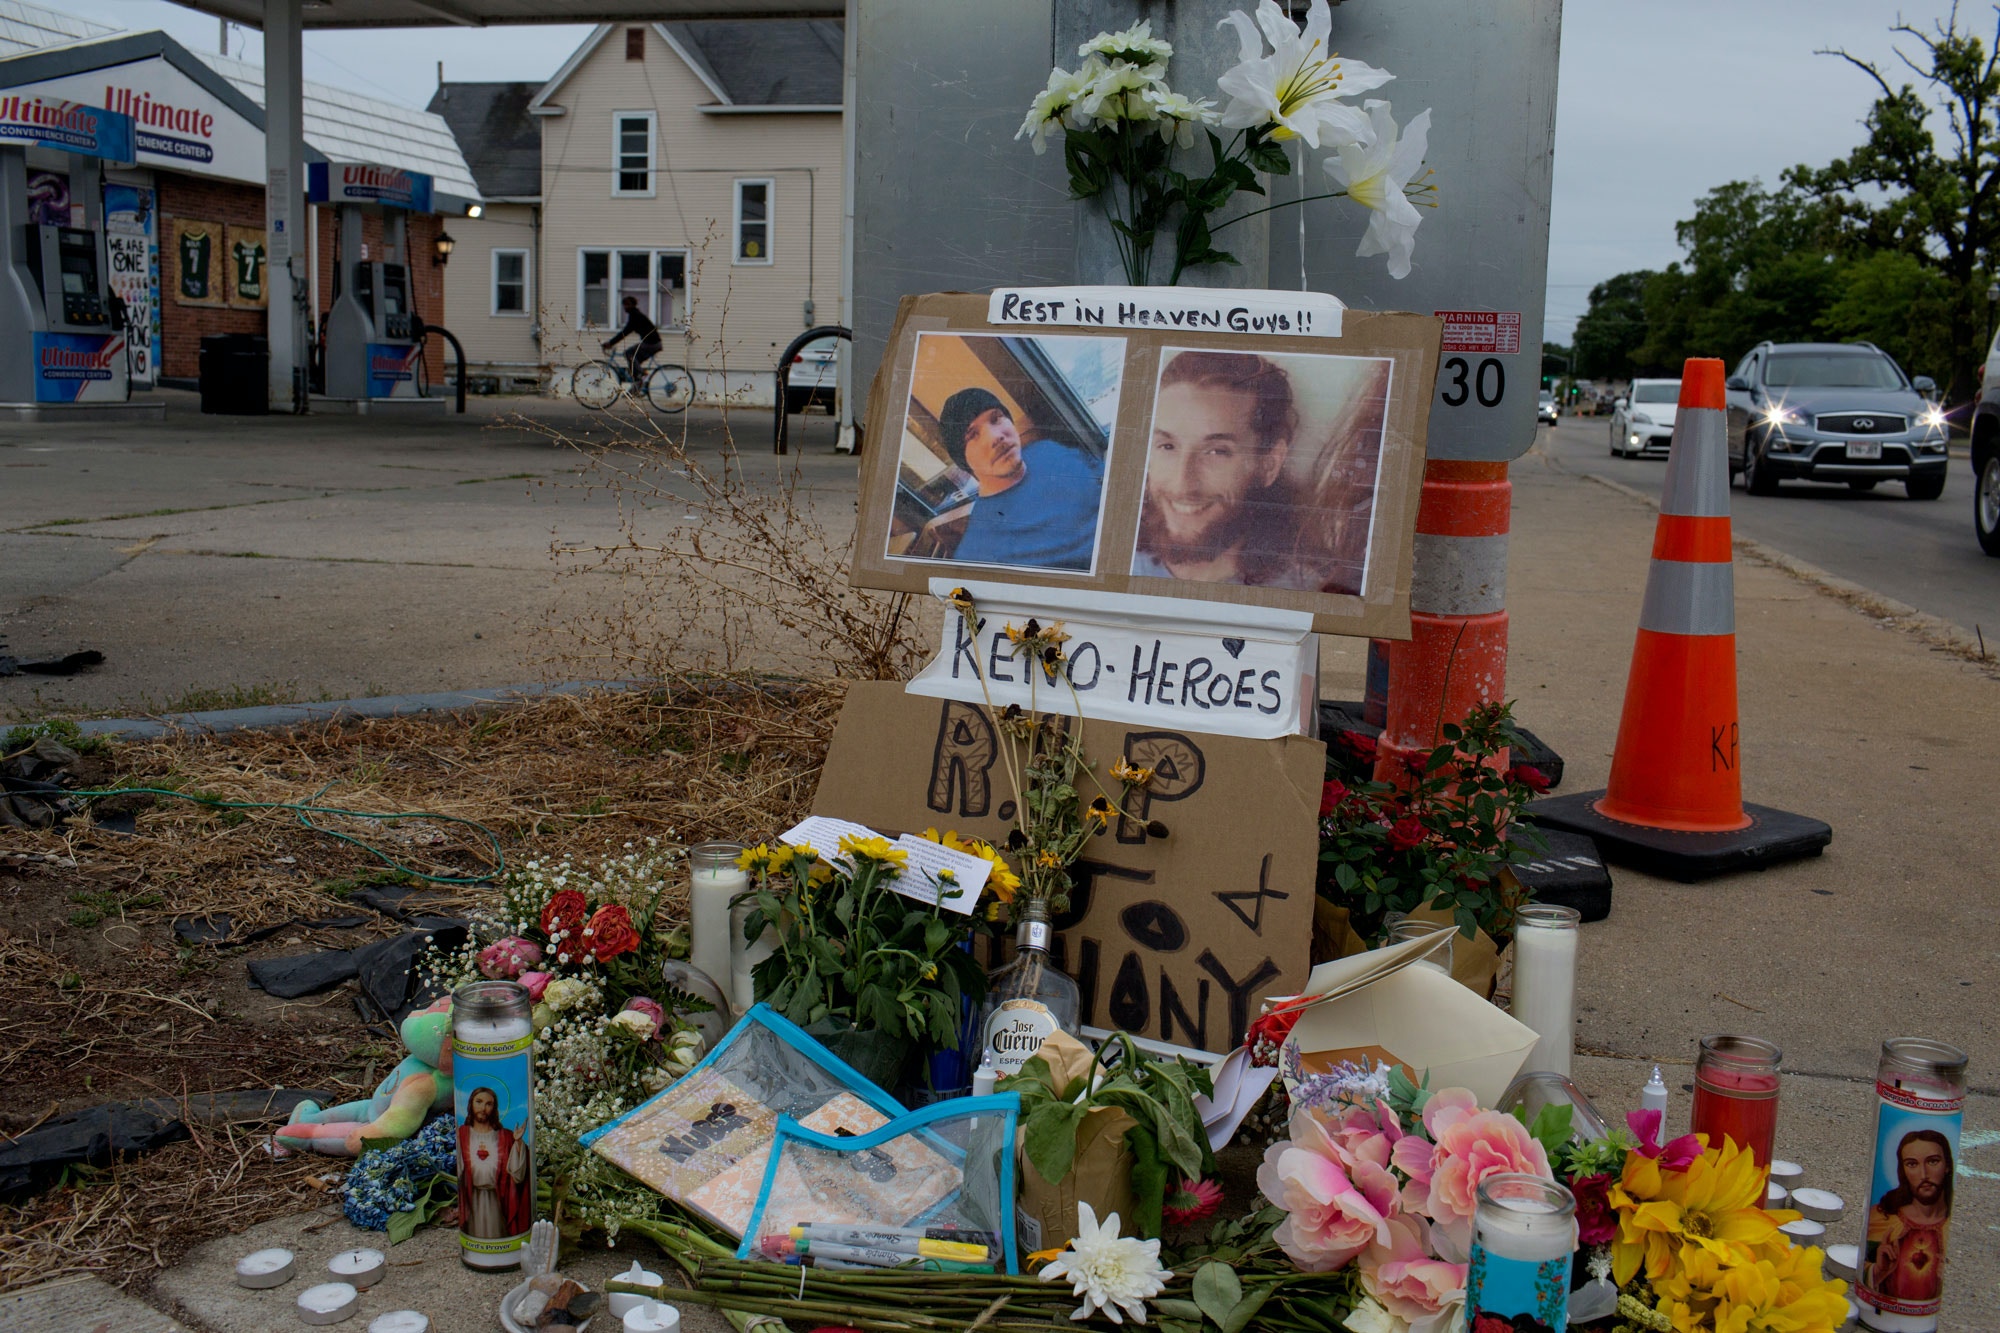 A small memorial decorates a lamp post near where Joseph Rosenbaum and Anthony Huber, two supporters of the Black Lives Matter movement, were shot and killed by a 17 year old militia member during a night of rioting, as seen on September 1, 2020, in Kenosha, Wisconsin.